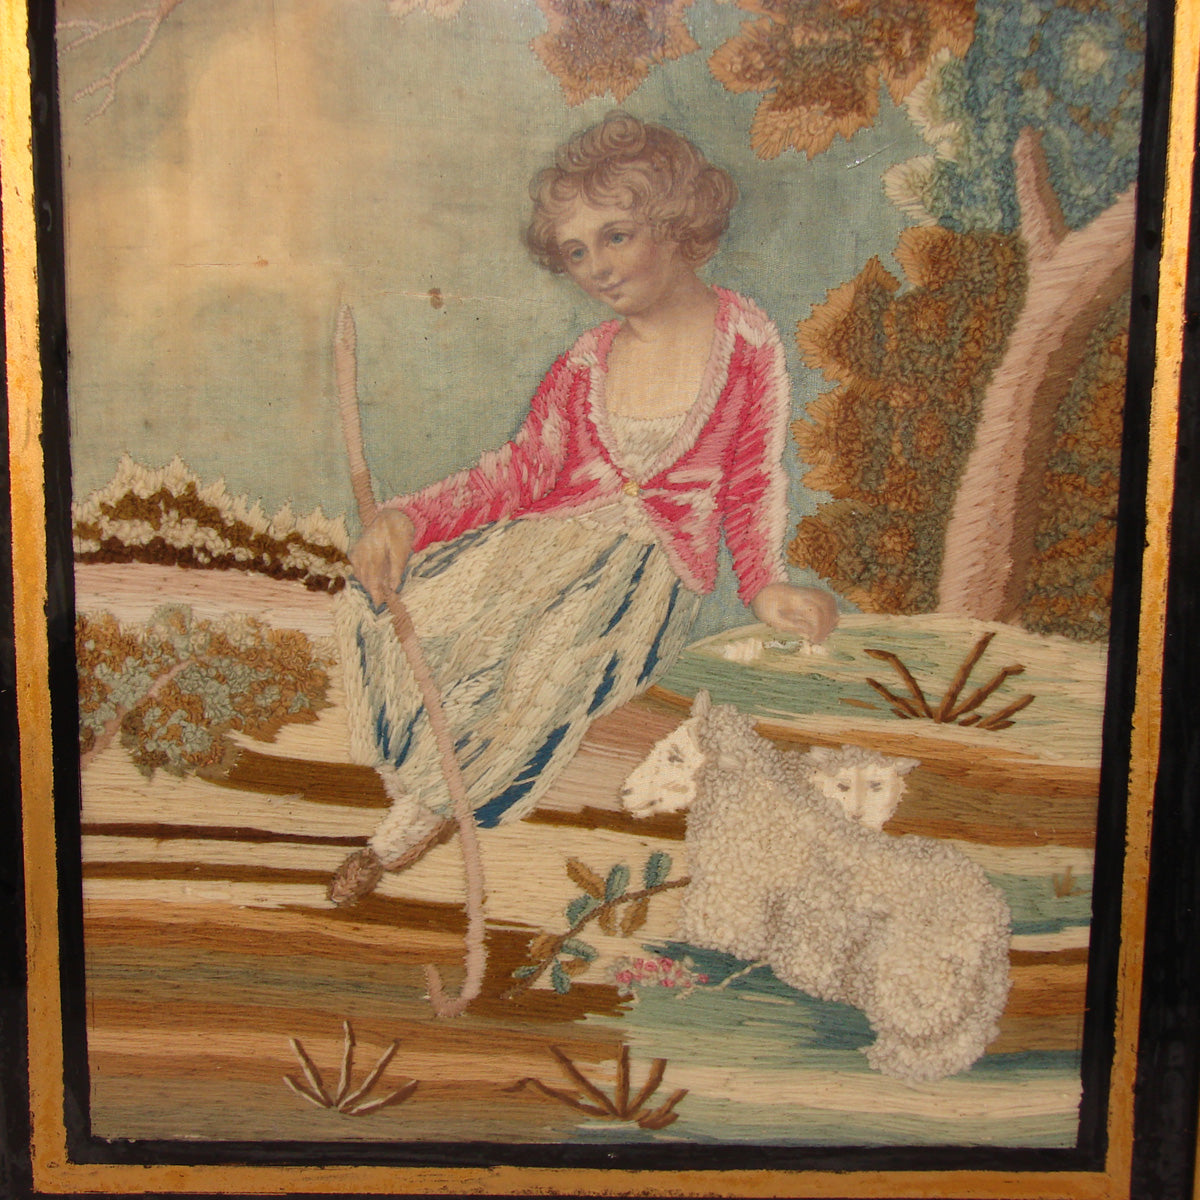 Antique 1700 to Early 1800s English Silk Work Embroidery Tapestry, Sampler in Frame, Lamb or Sheep